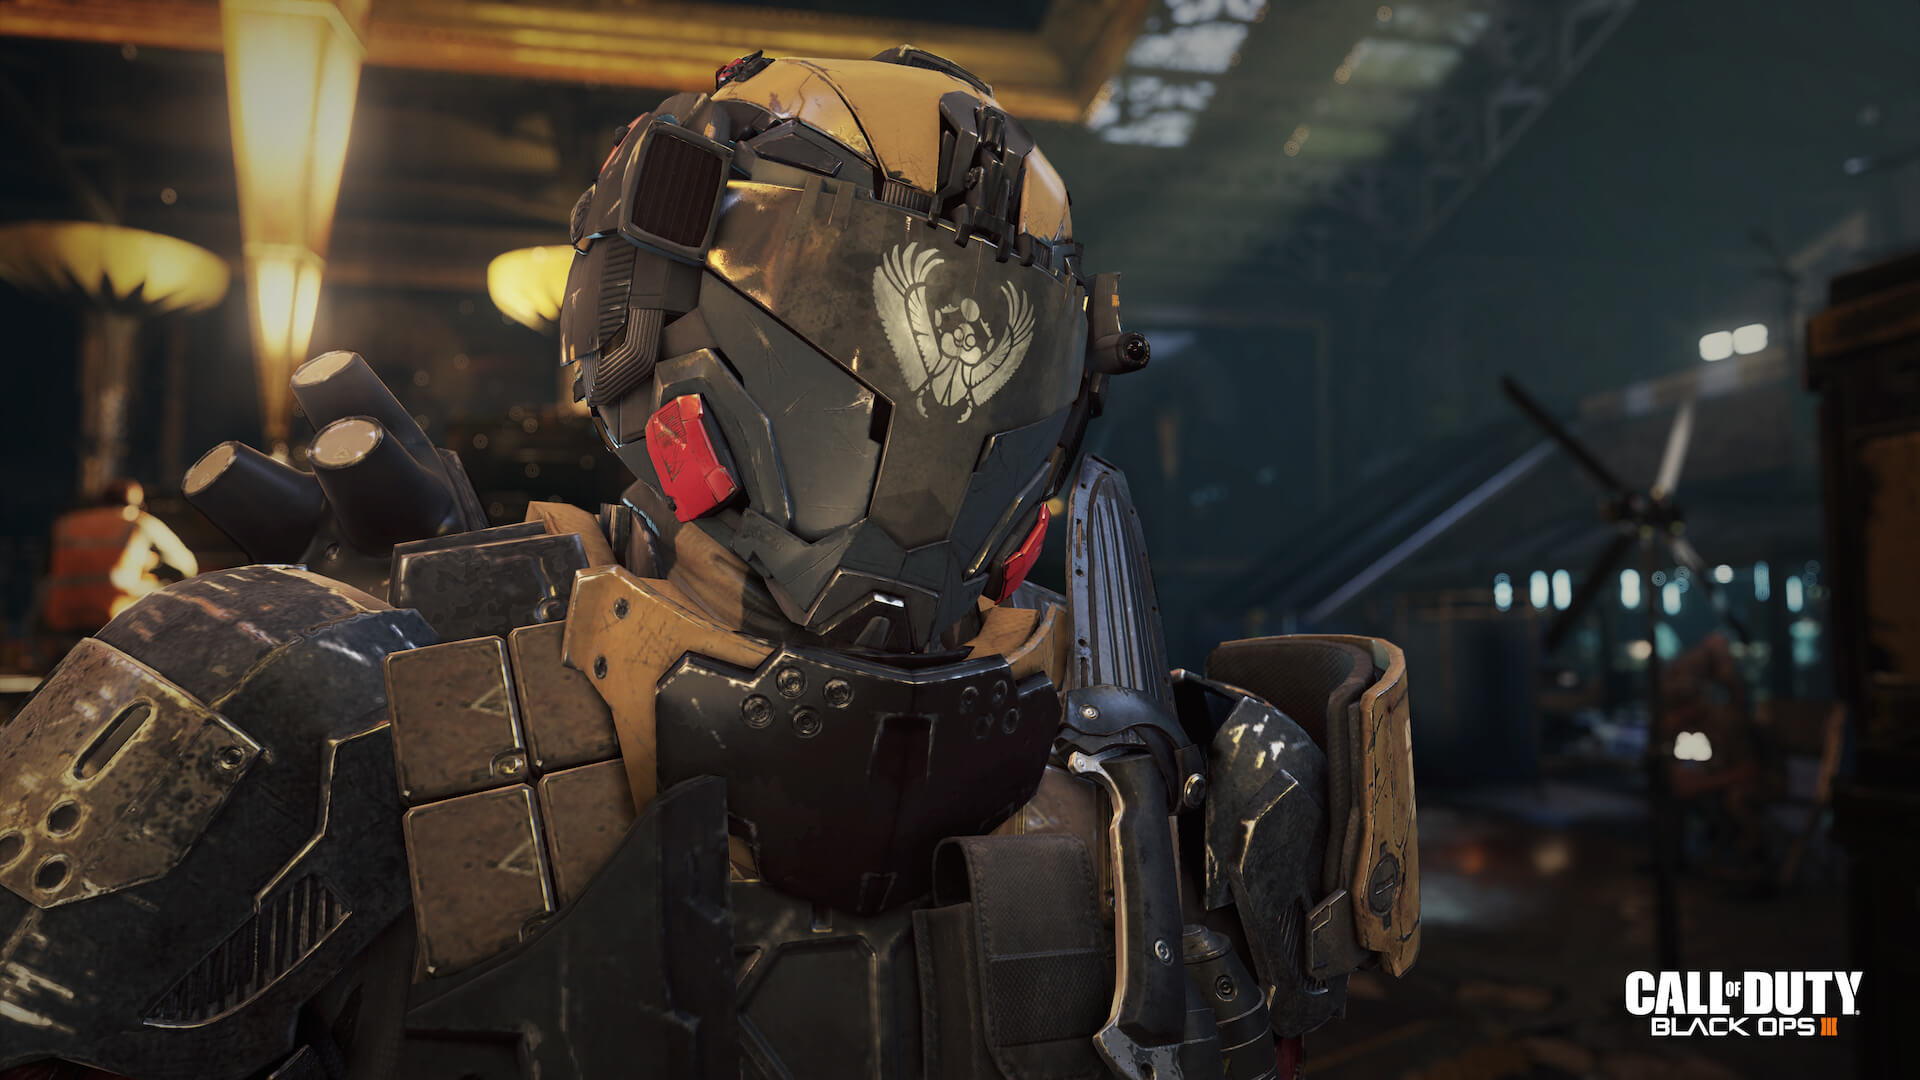 Call of Duty Black Ops 3 Gameplay Details Revealed Beta